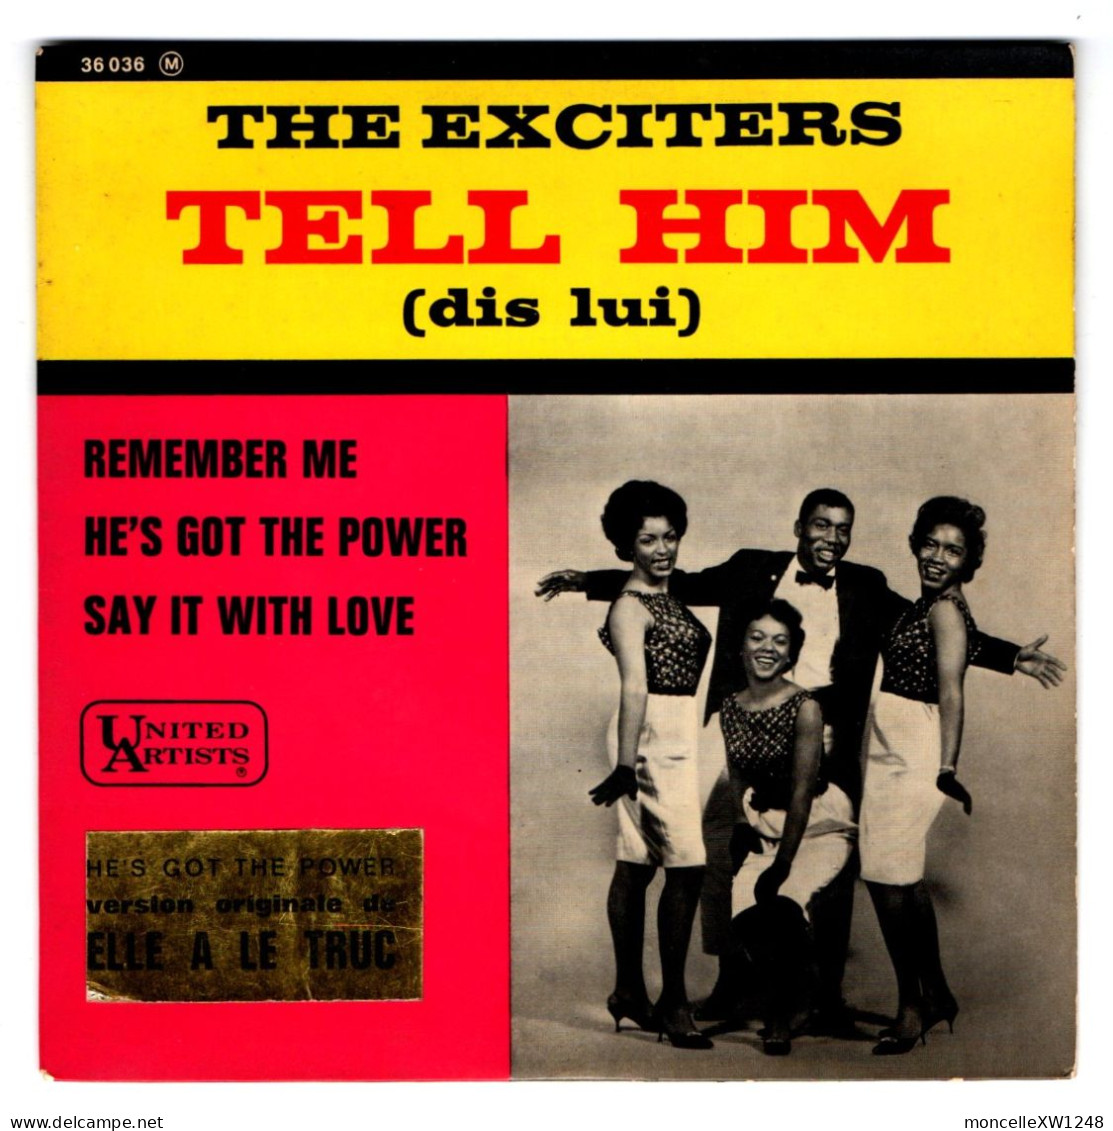 The Exciters - 45 T EP Tell Him (1963) - 45 T - Maxi-Single